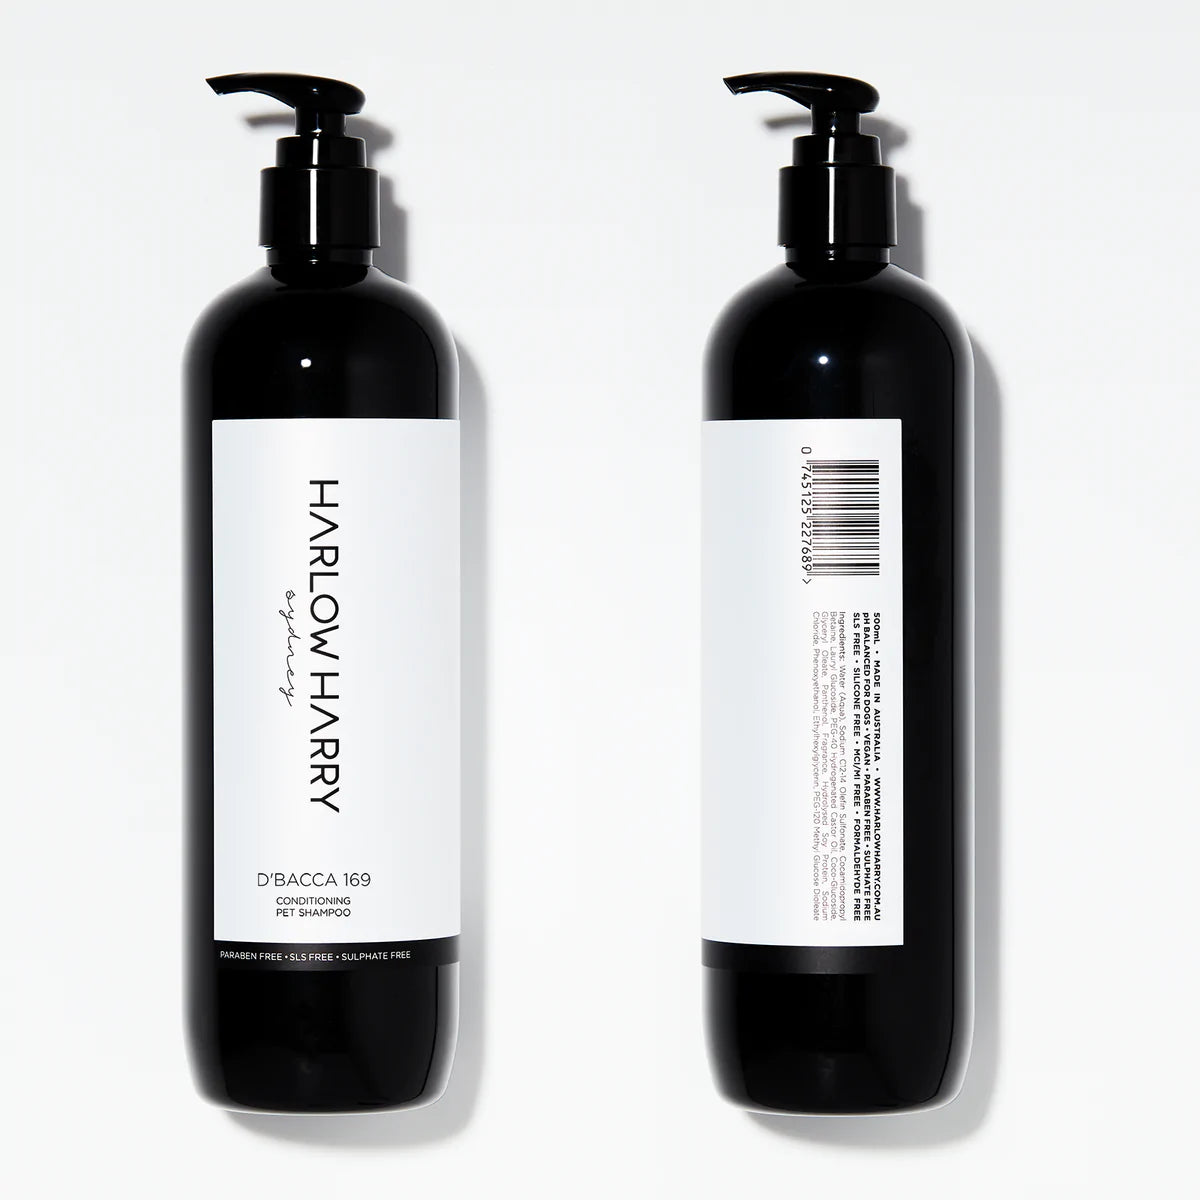 Conditioning Shampoo | D'bacca 169